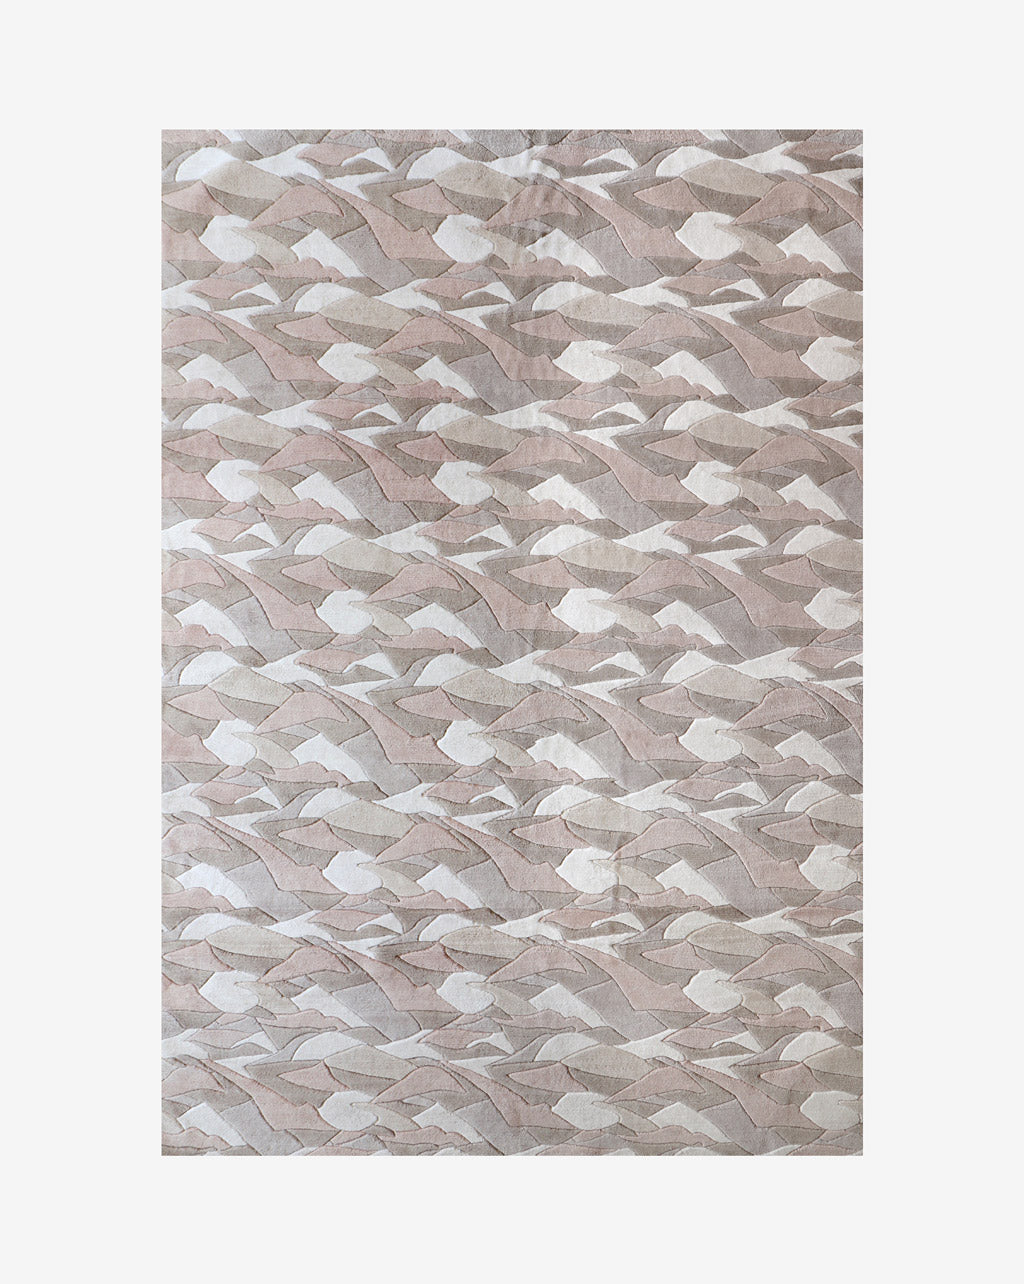  The Mani merino wool rug in Air features a neutral palette that includes white, beige, tan, and dusty pink.